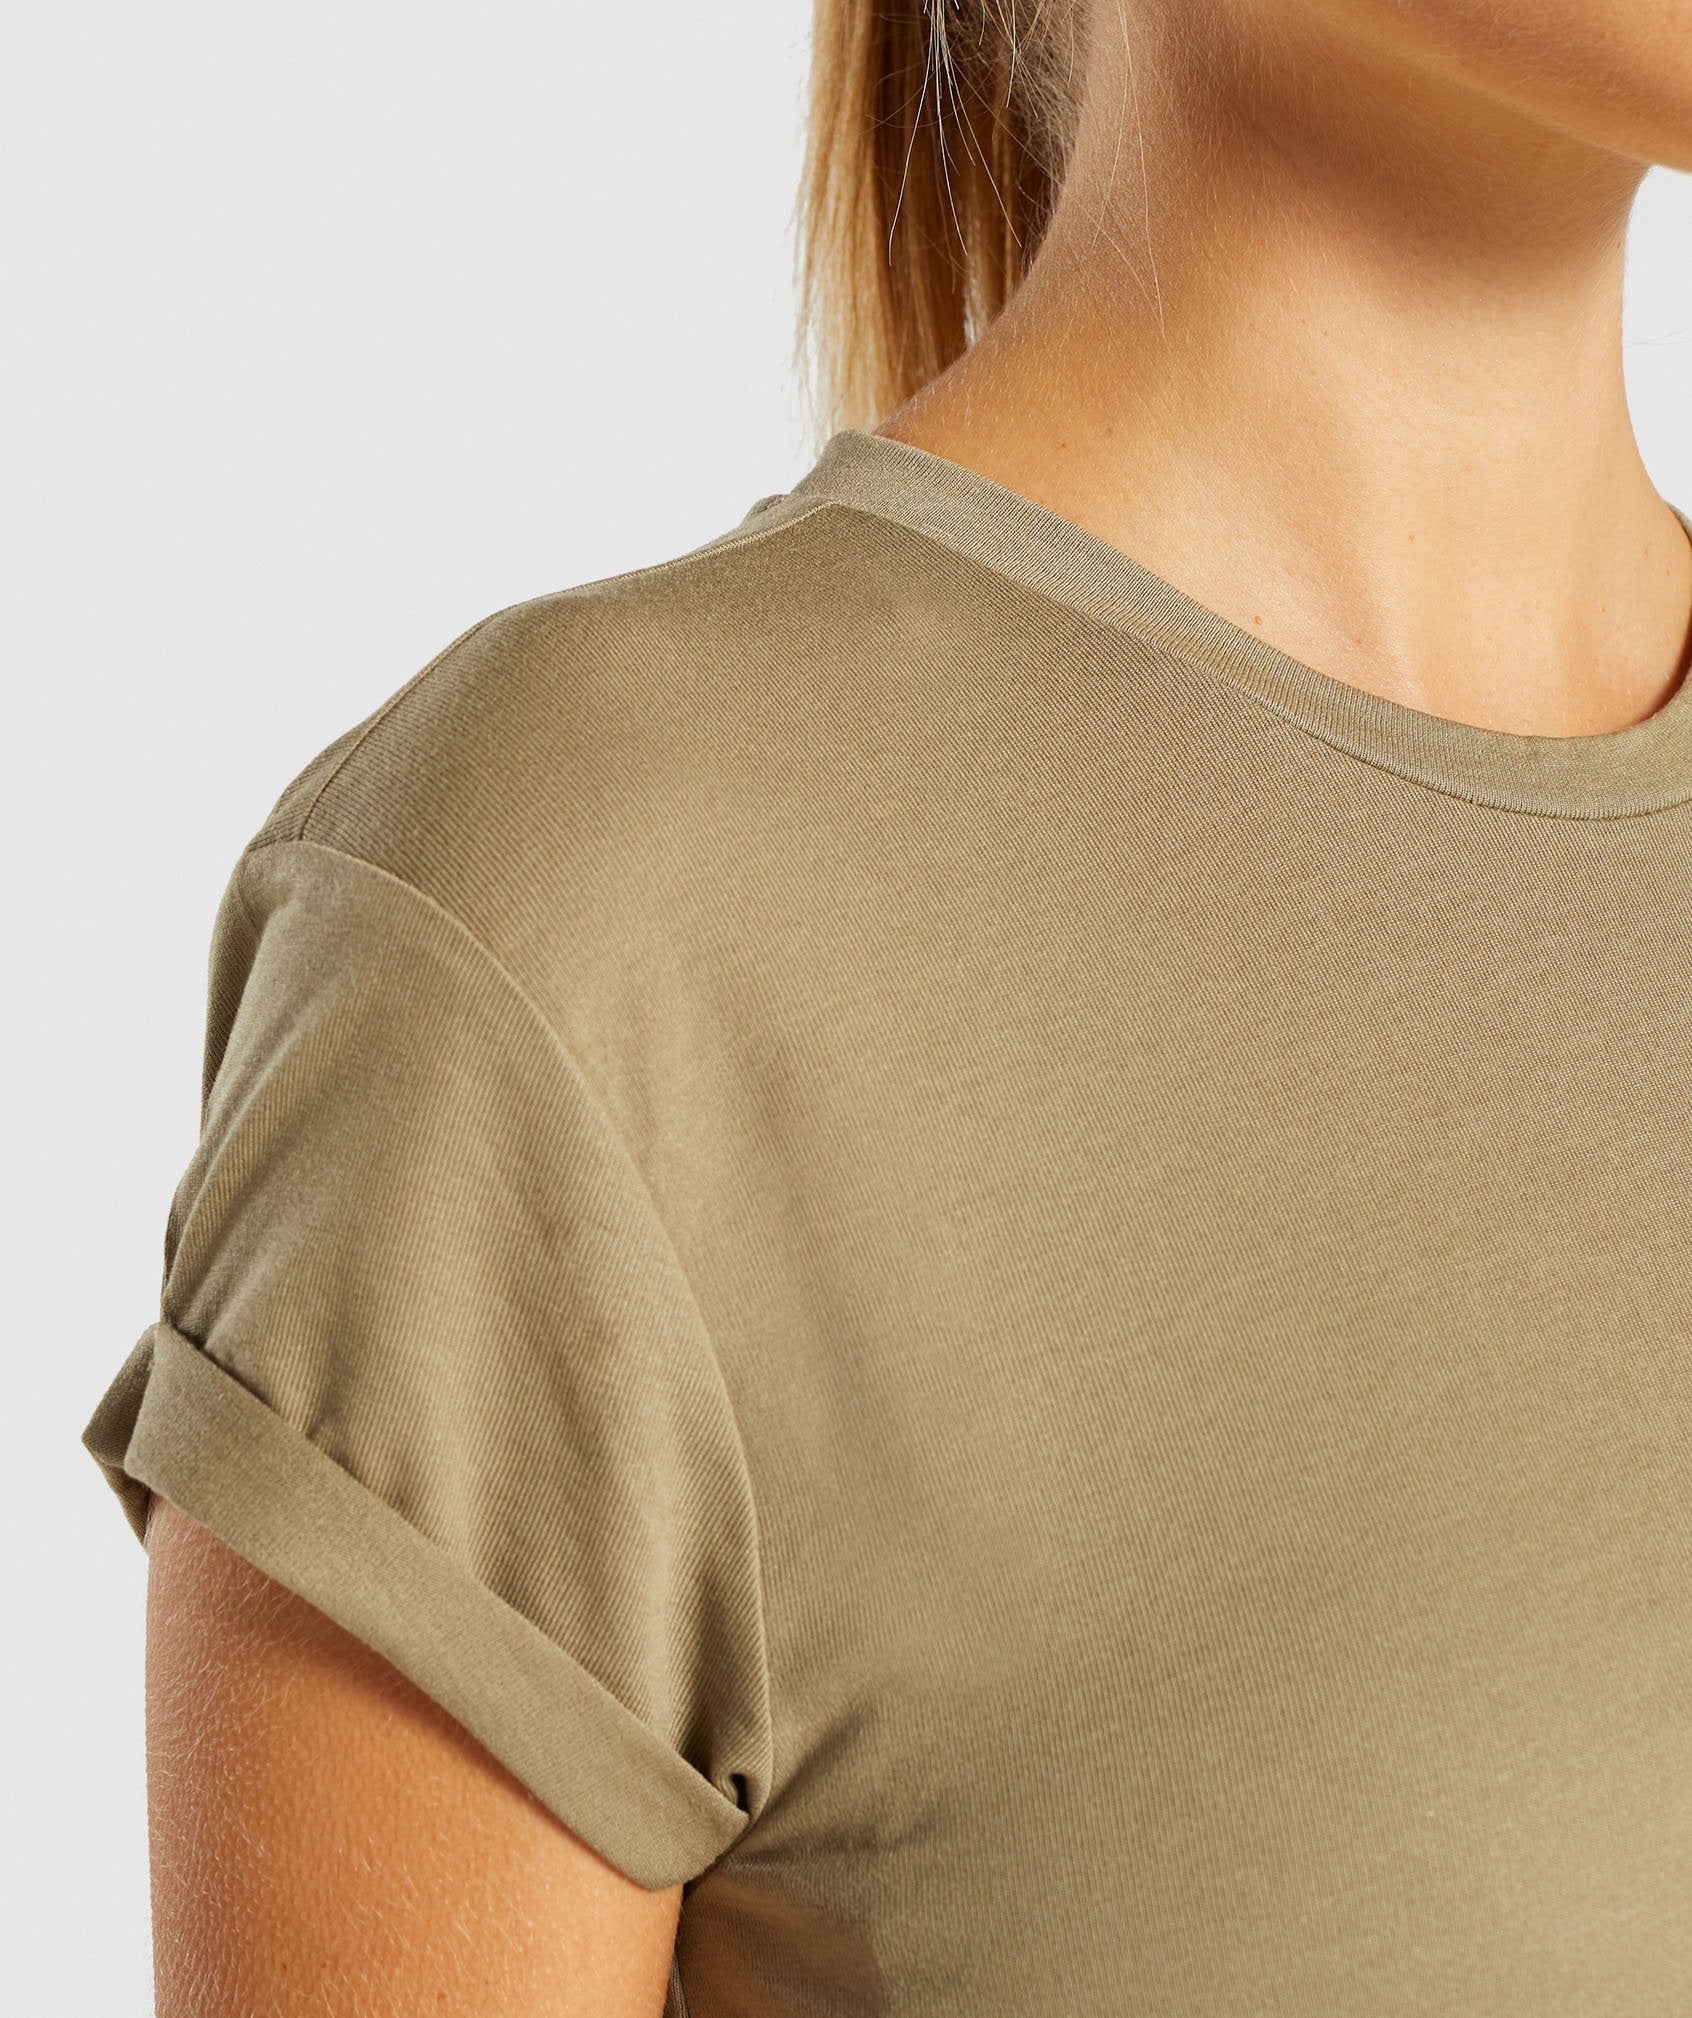 Essential Be A Visionary Tee in Washed Khaki/White - view 5